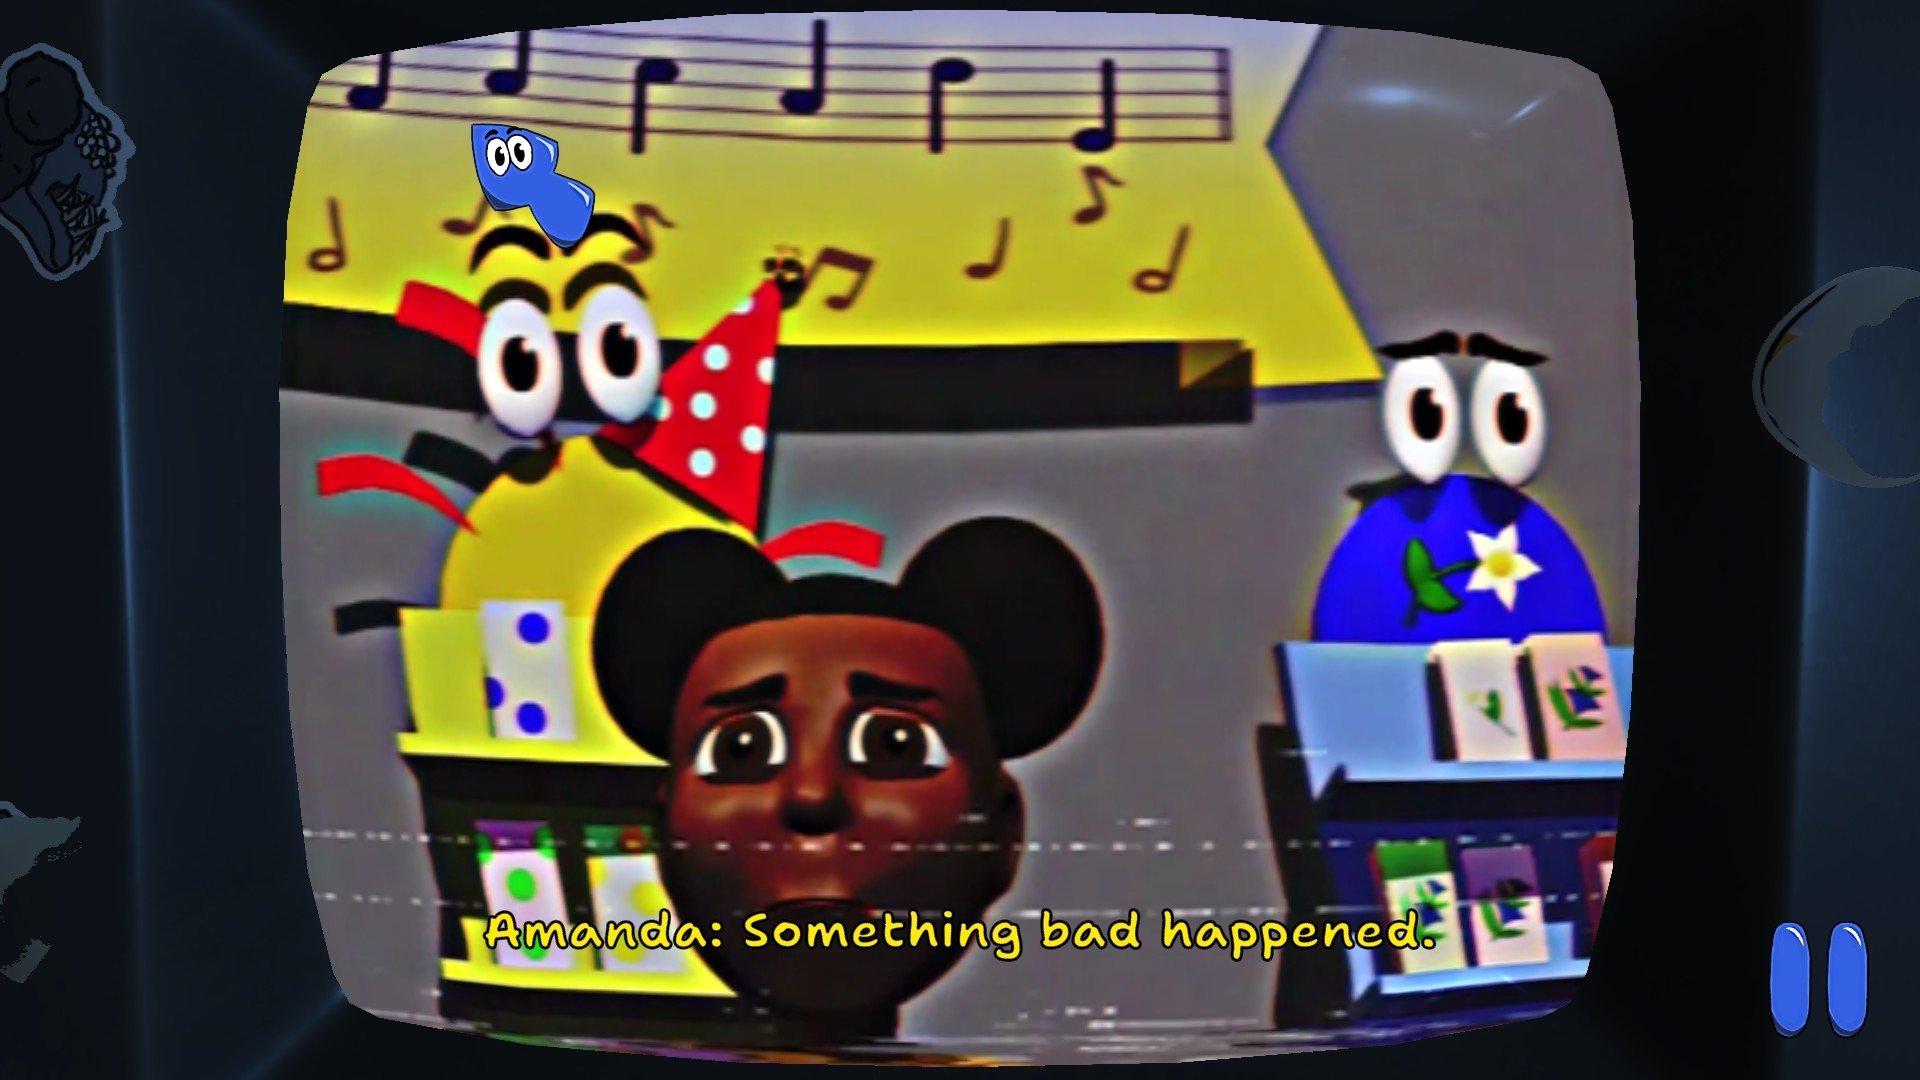 Game Screenshow showing a CRT screen with CGI characters on it. In the background several shelves have eyes, while a little girl fills the centre of the screen with a downcast face and a dark filter over everything. The subtitles read: "Amanda: Something bad happened."